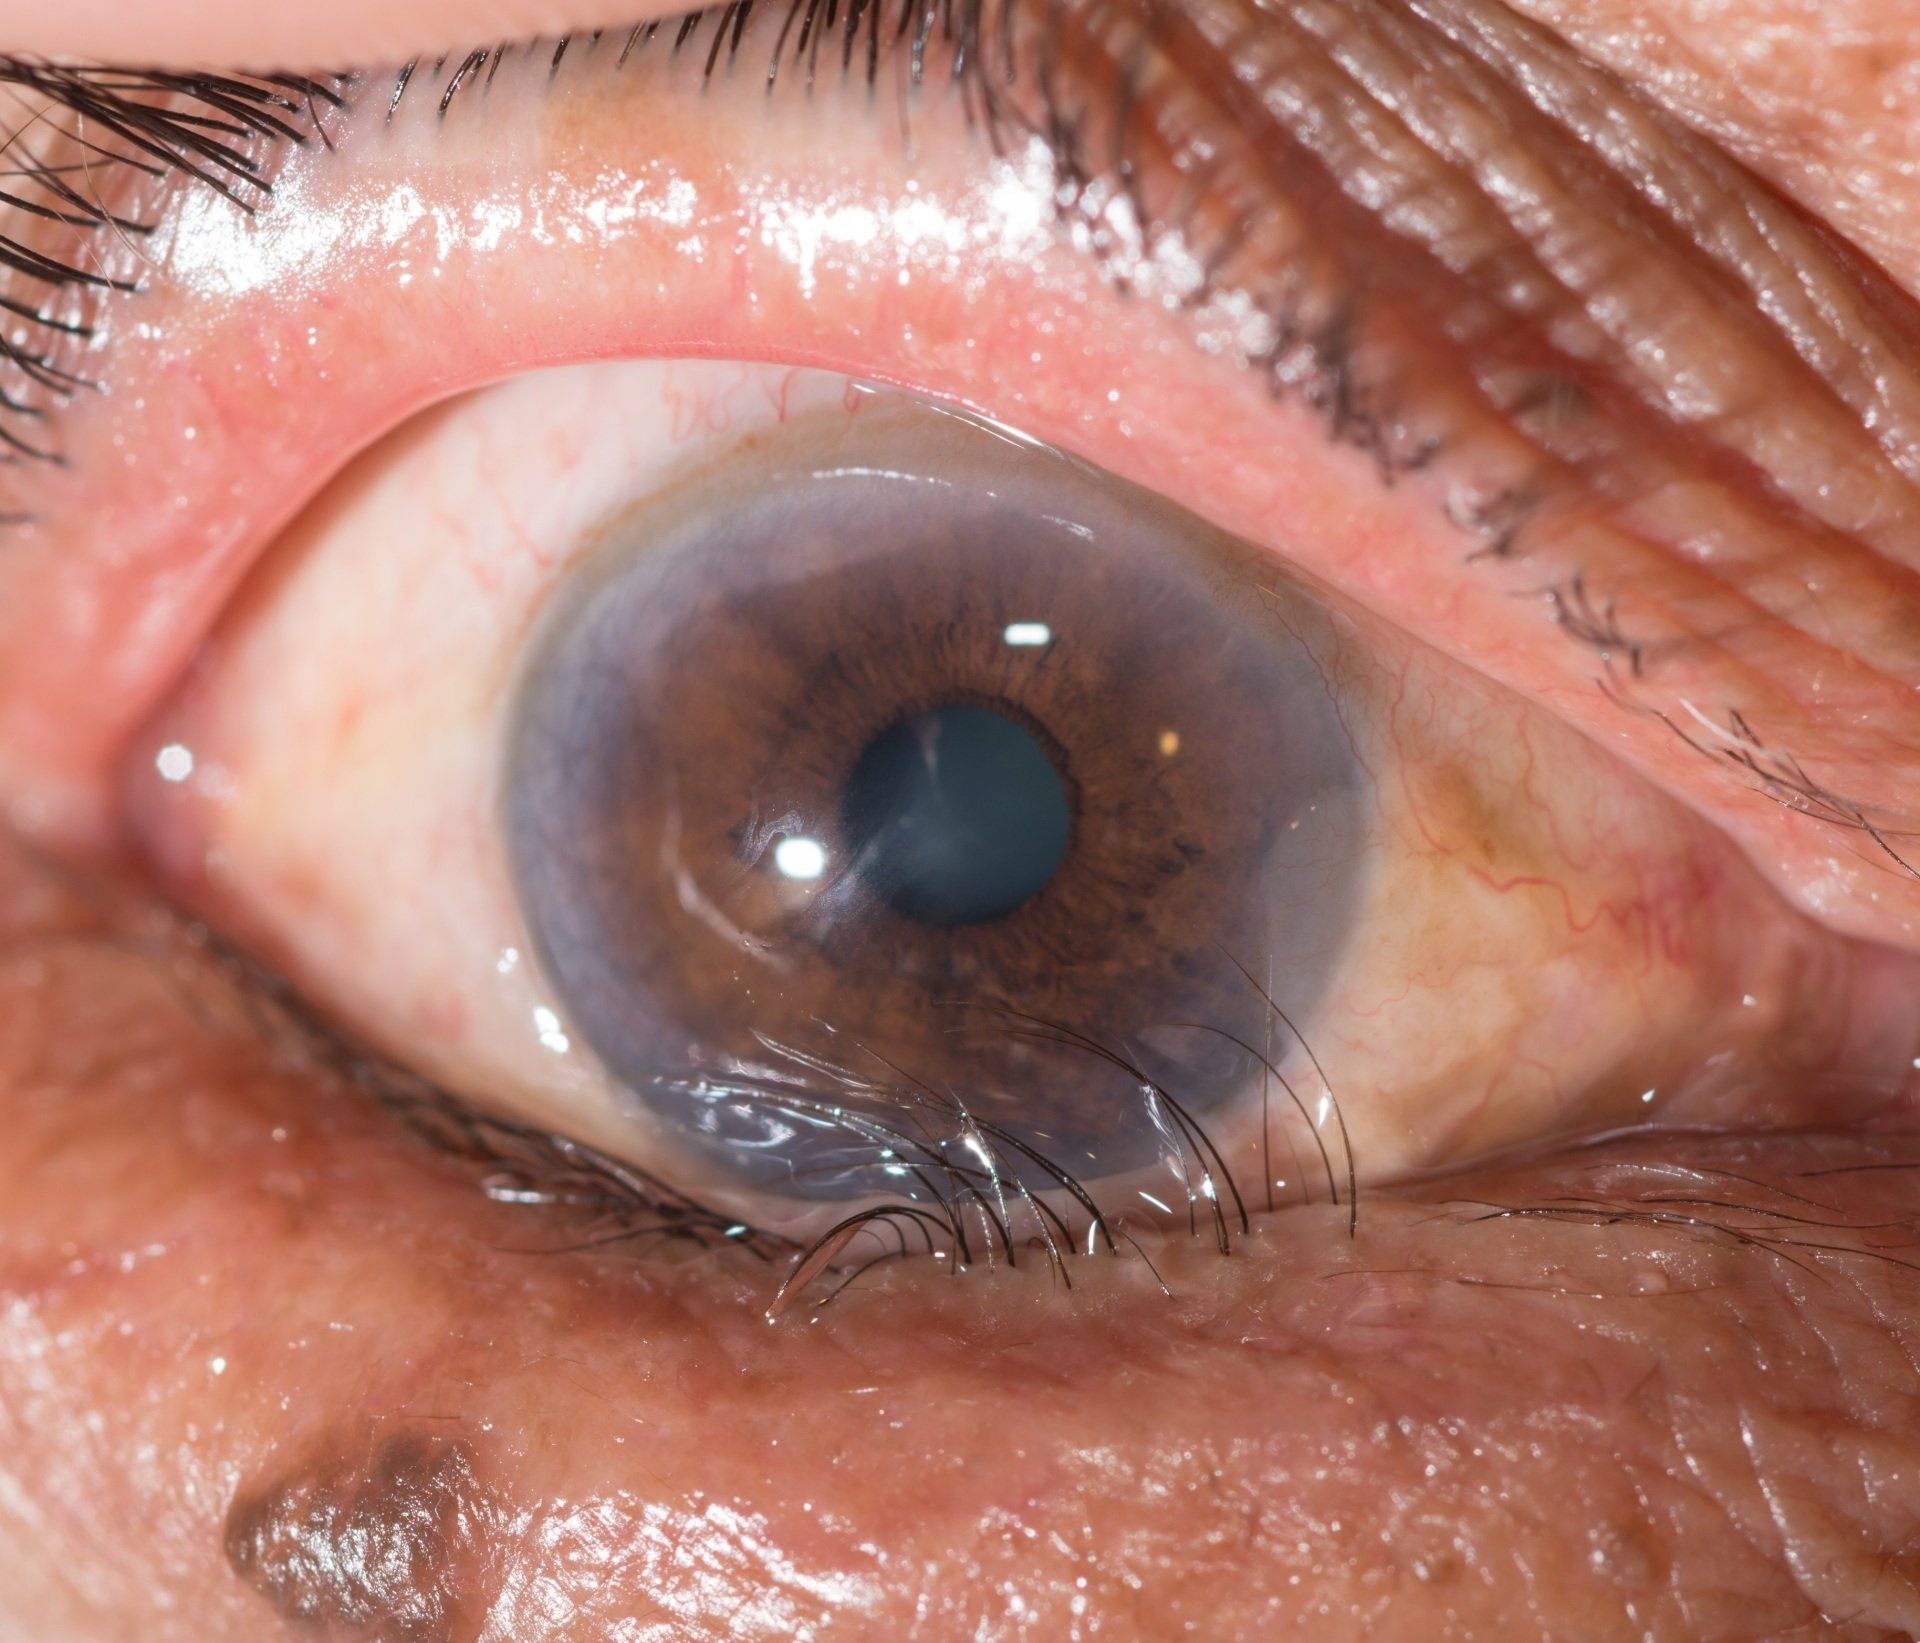 Entropion of the lower eyelid